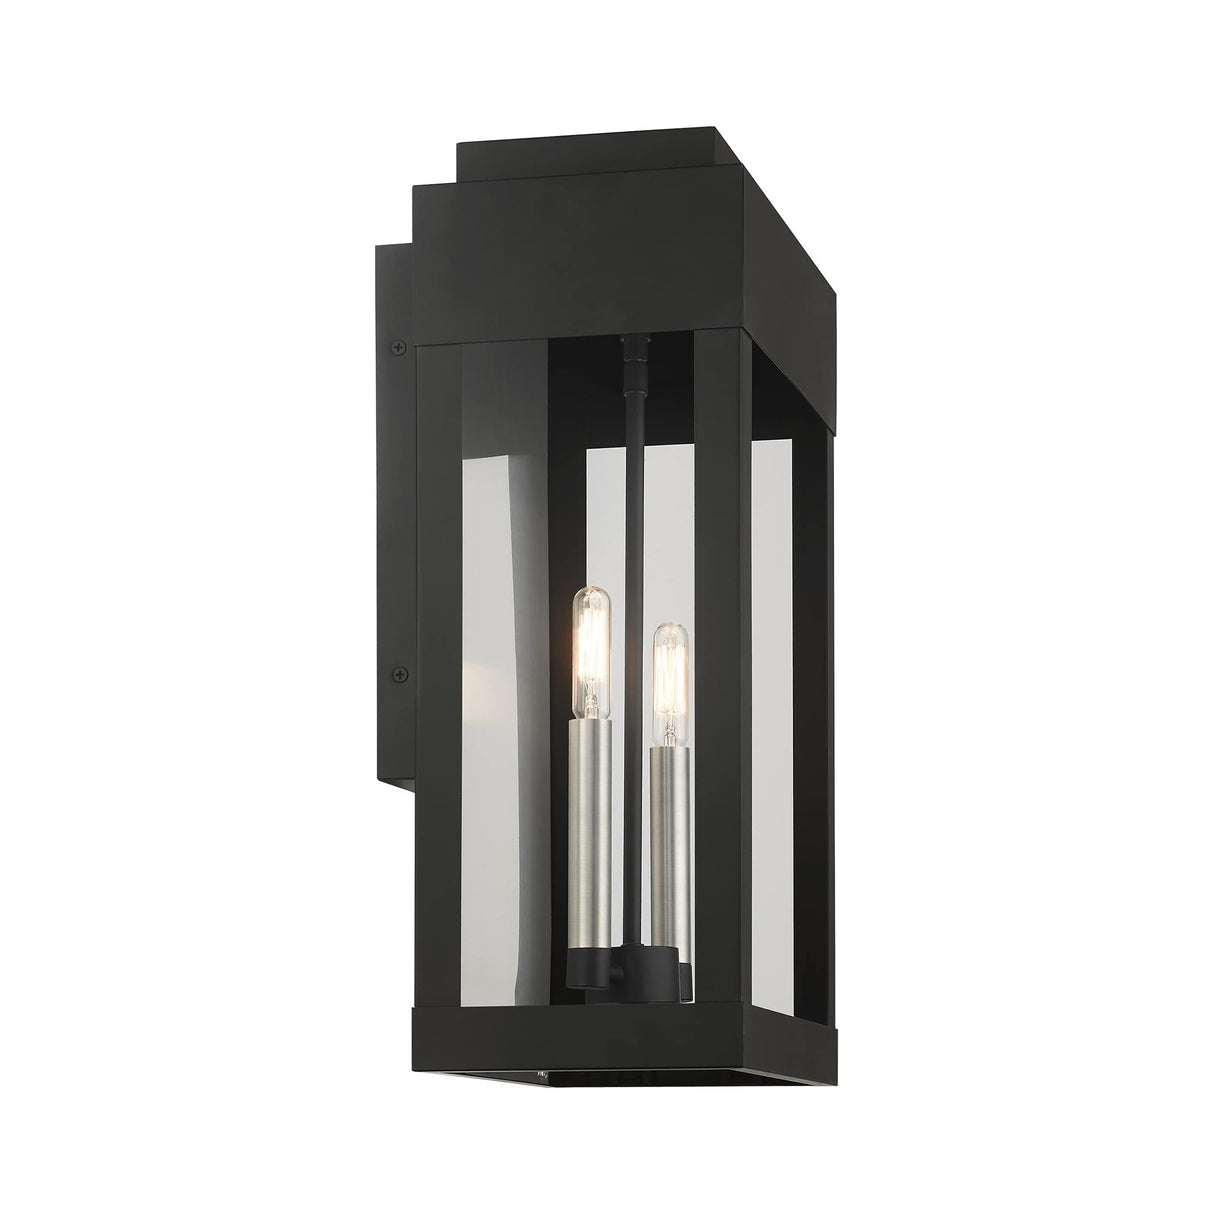 Livex Lighting 21238-04 York 2 Light Outdoor Wall Lantern, Black with Brushed Nickel Finish Candles with Brushed Nickel Stainless Steel Reflector